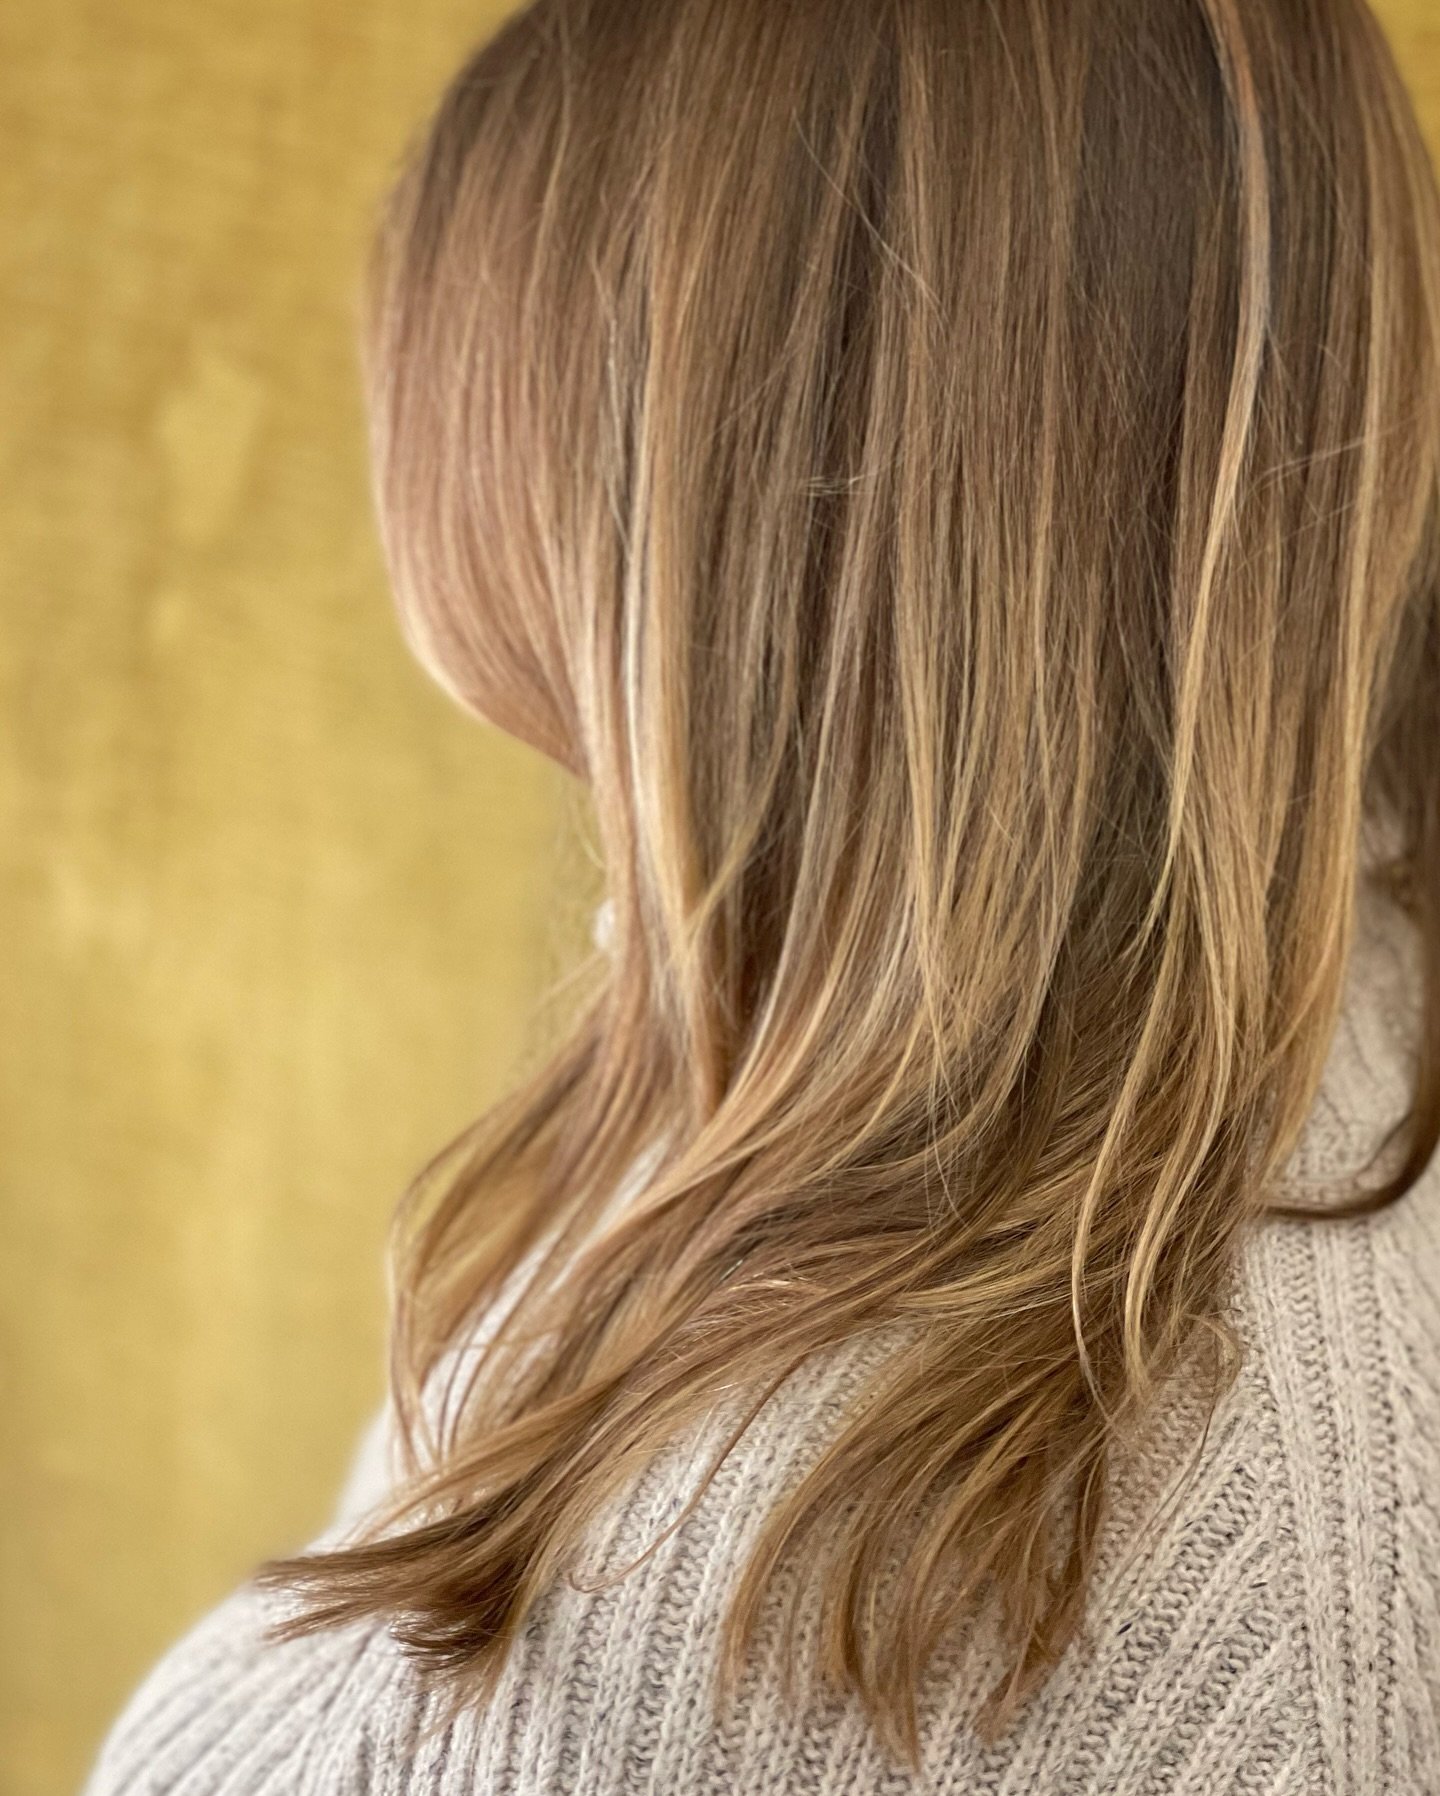 Grown out roots? You don&rsquo;t always have to re-highlight for your maintenance appointment. A root smudge might be the perfect service for you to extend the time between highlights! Here are 3 things you should know about this service:

1️⃣ A root